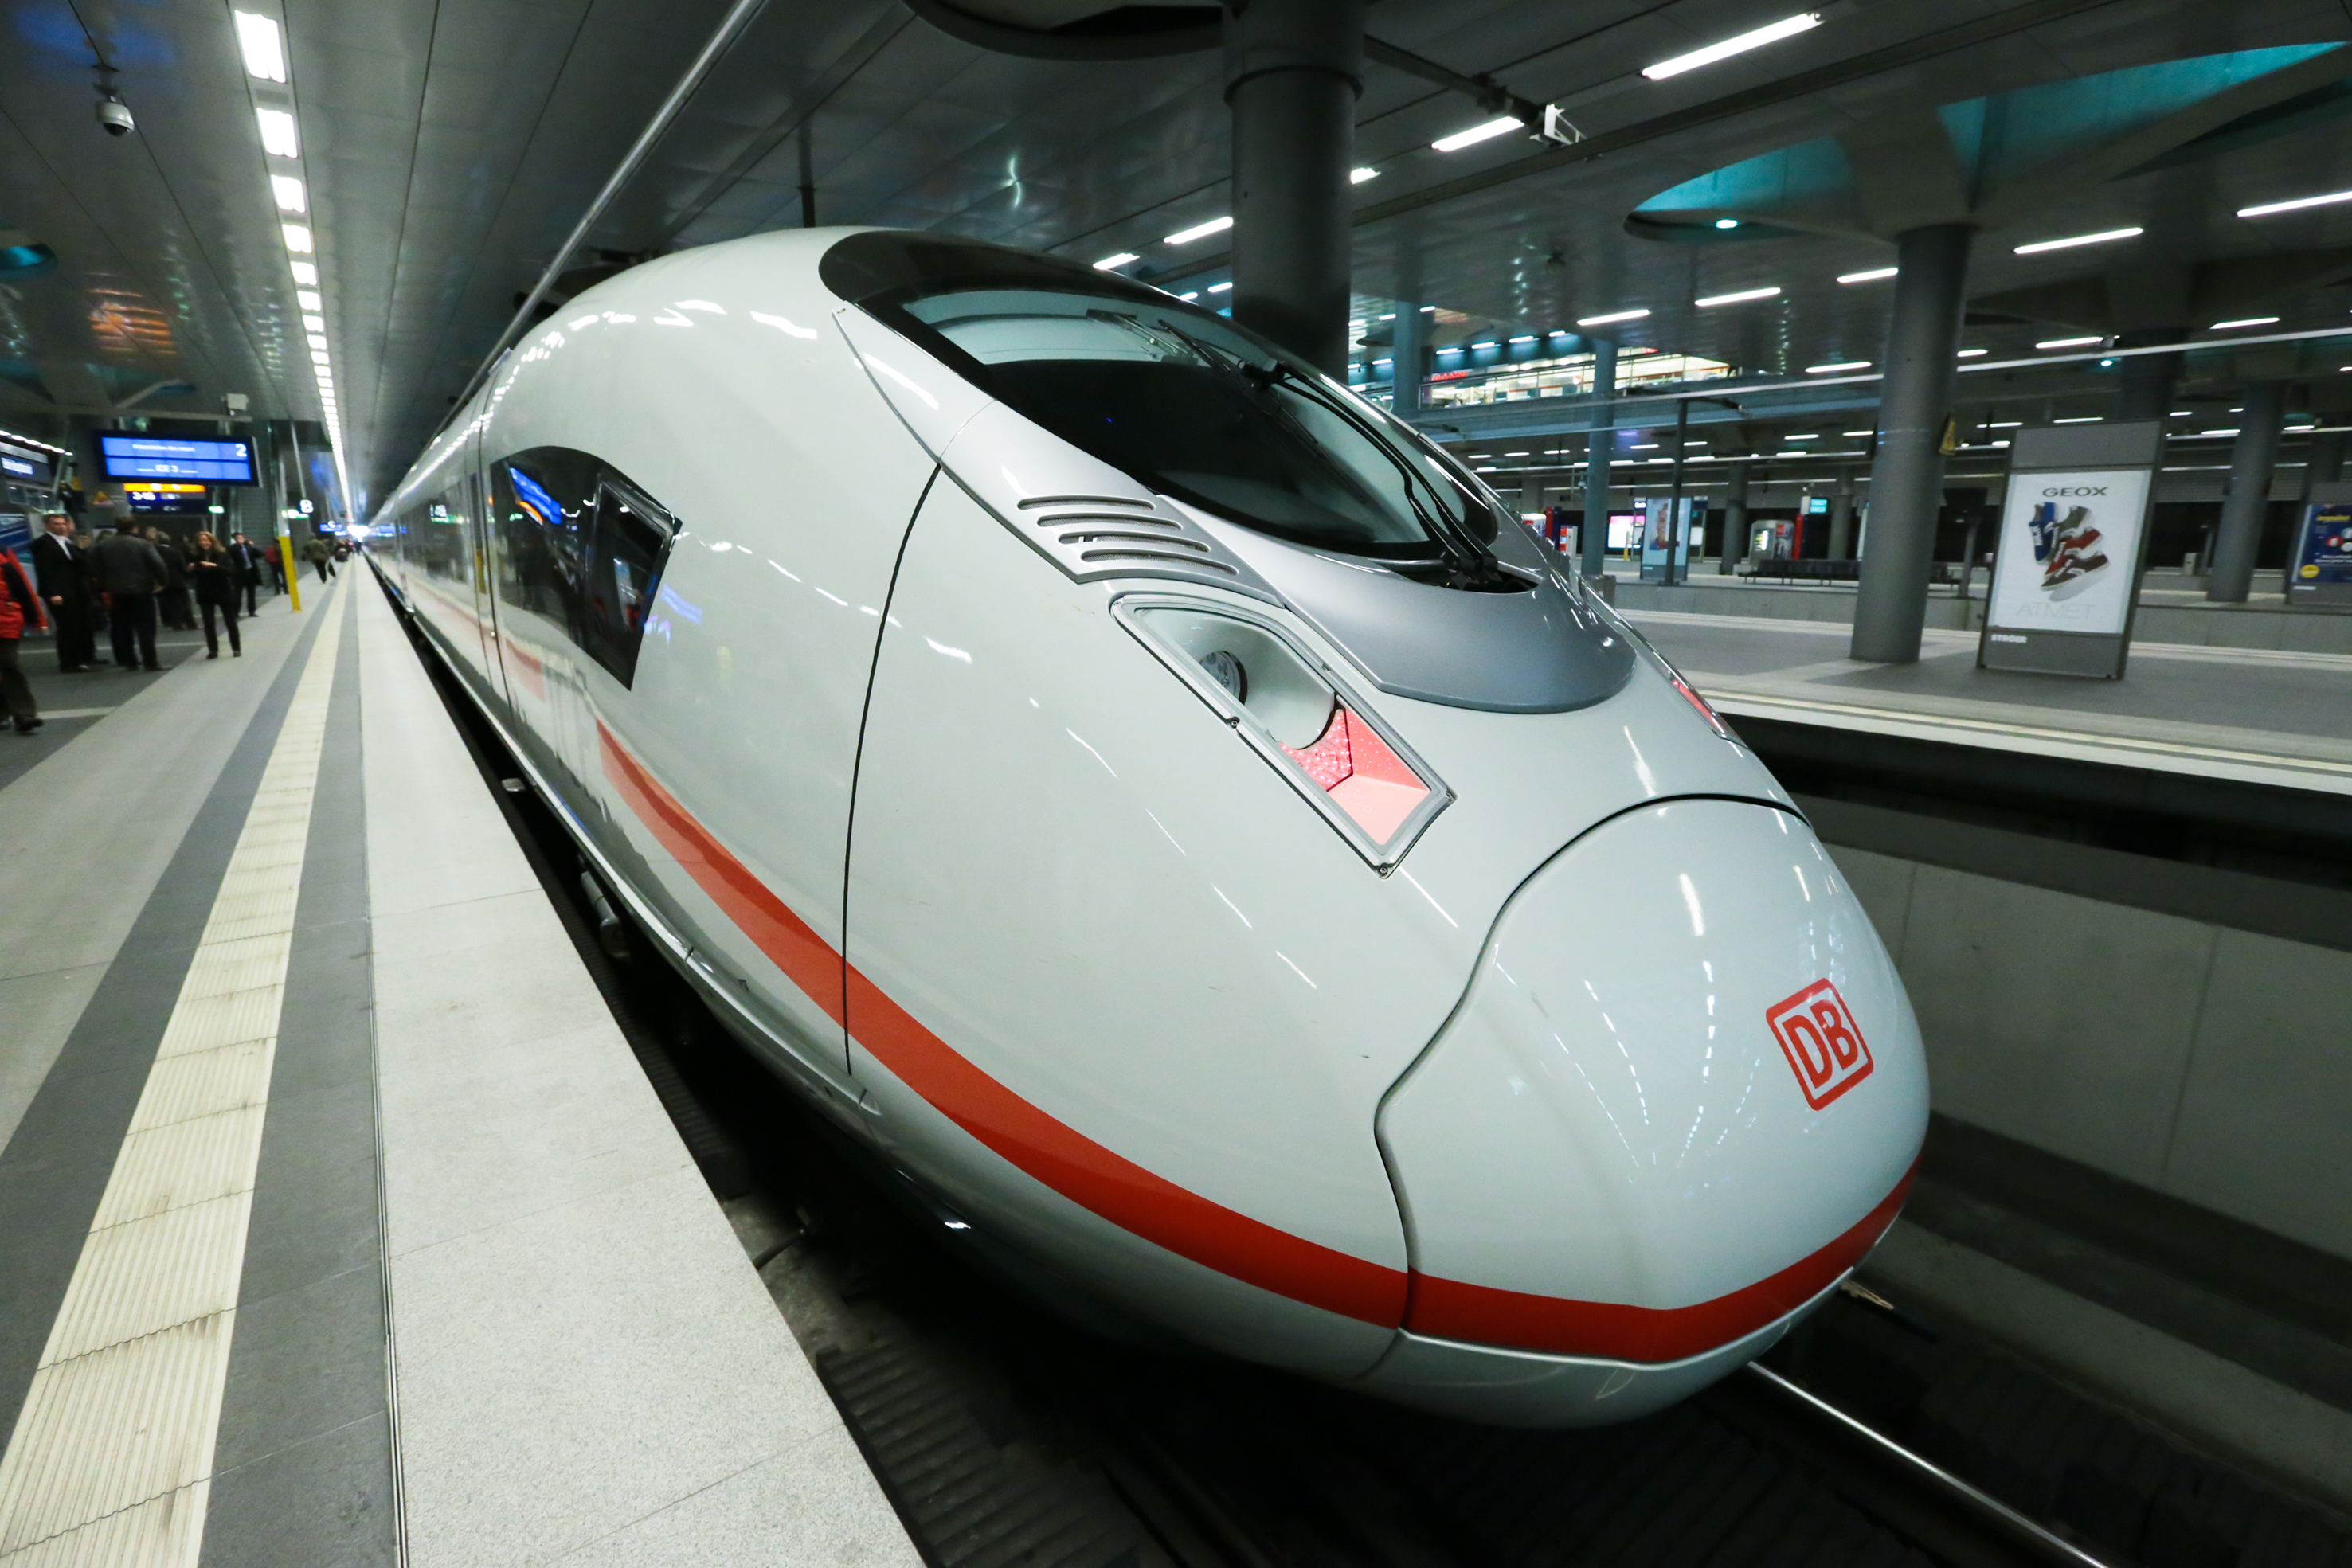 Predictive maintenance trial launched for DB’s ICE trains